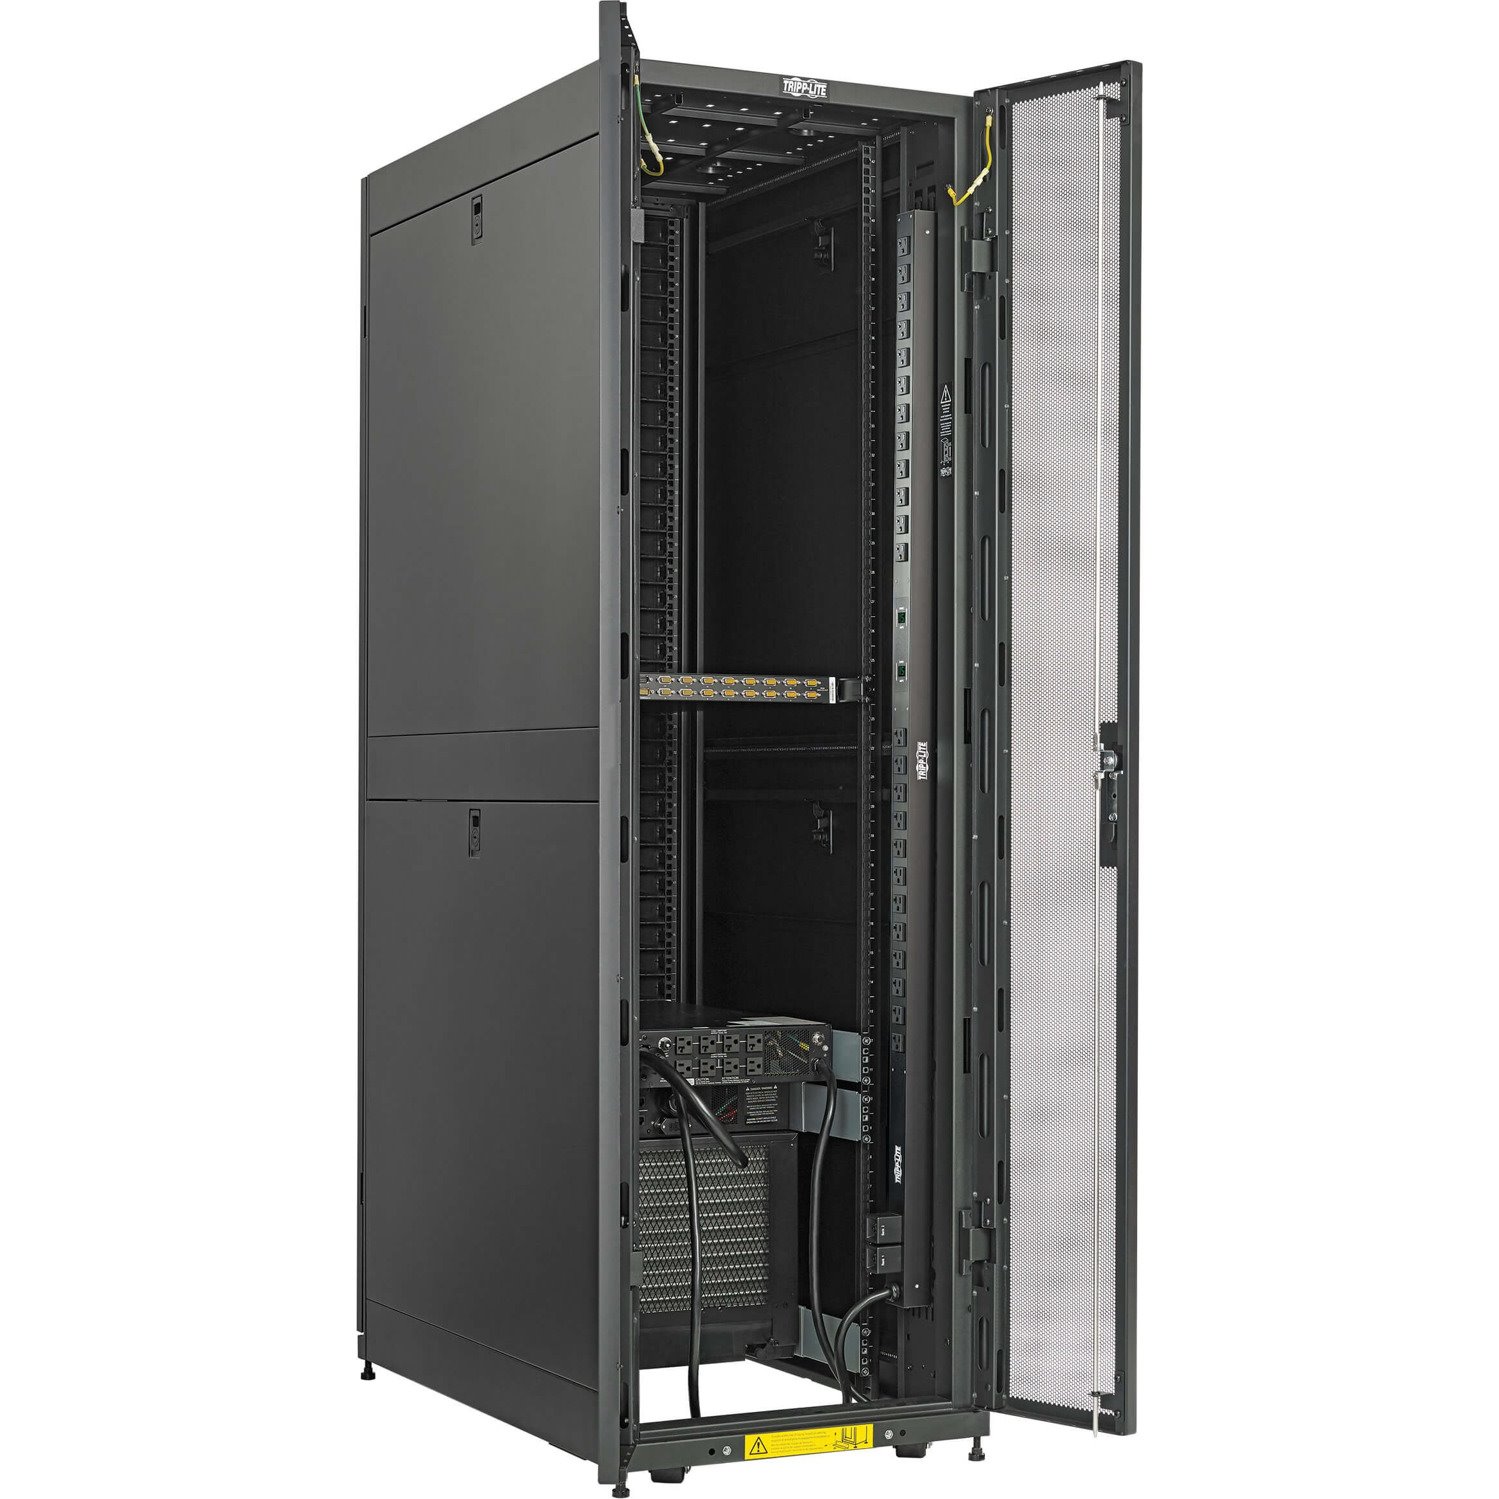 Tripp Lite by Eaton EdgeReady&trade; Micro Data Center - 40U, 3 kVA UPS, Network Management and PDU, 120V Assembled/Tested Unit